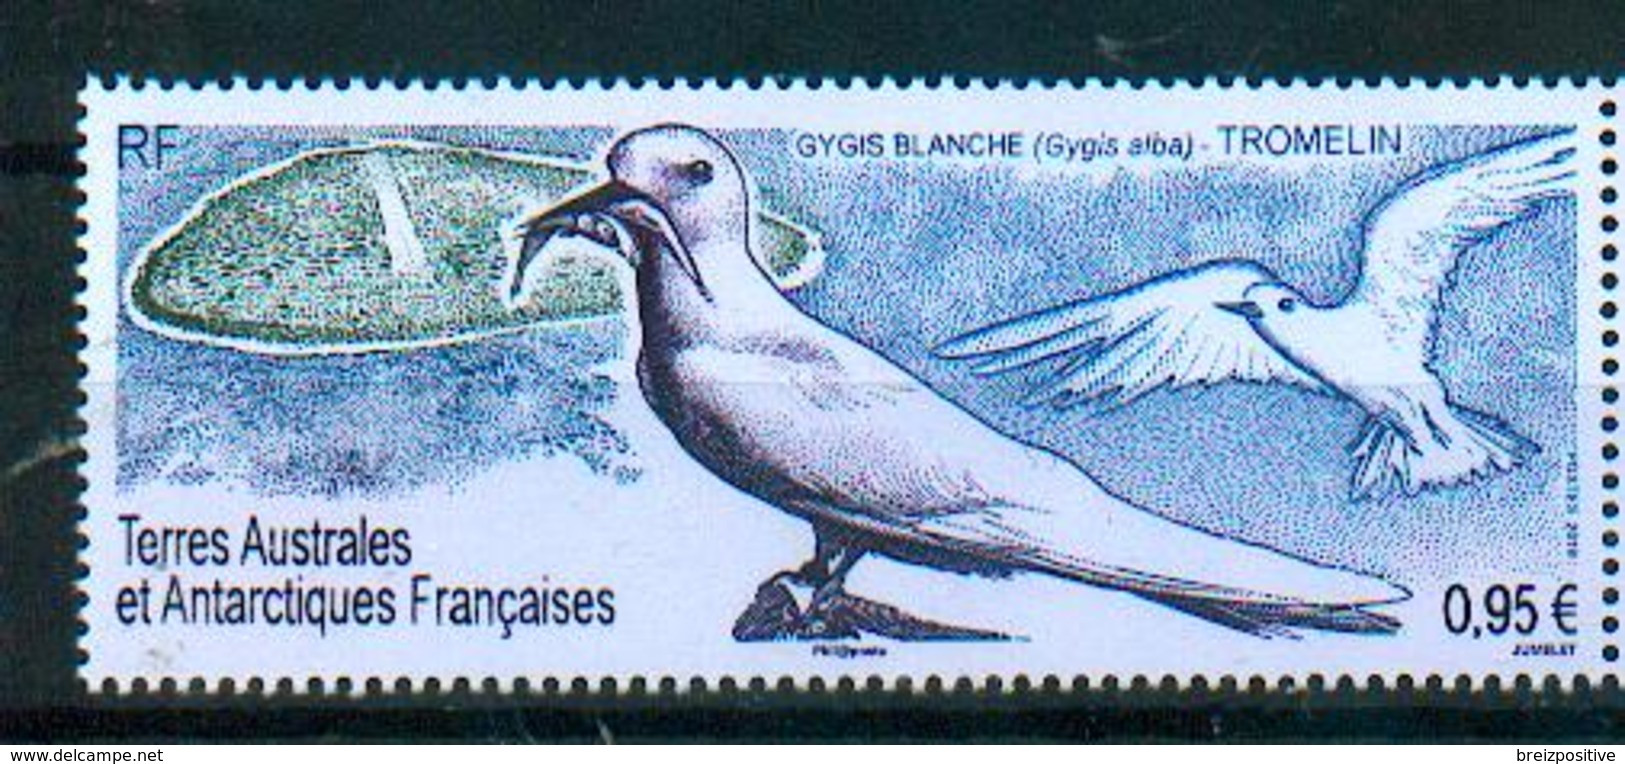 TAAF / French Southern Antarctic Territories 2019 - Gygis Blanche / White Tern / Gygis Alba - MNH - Seagulls